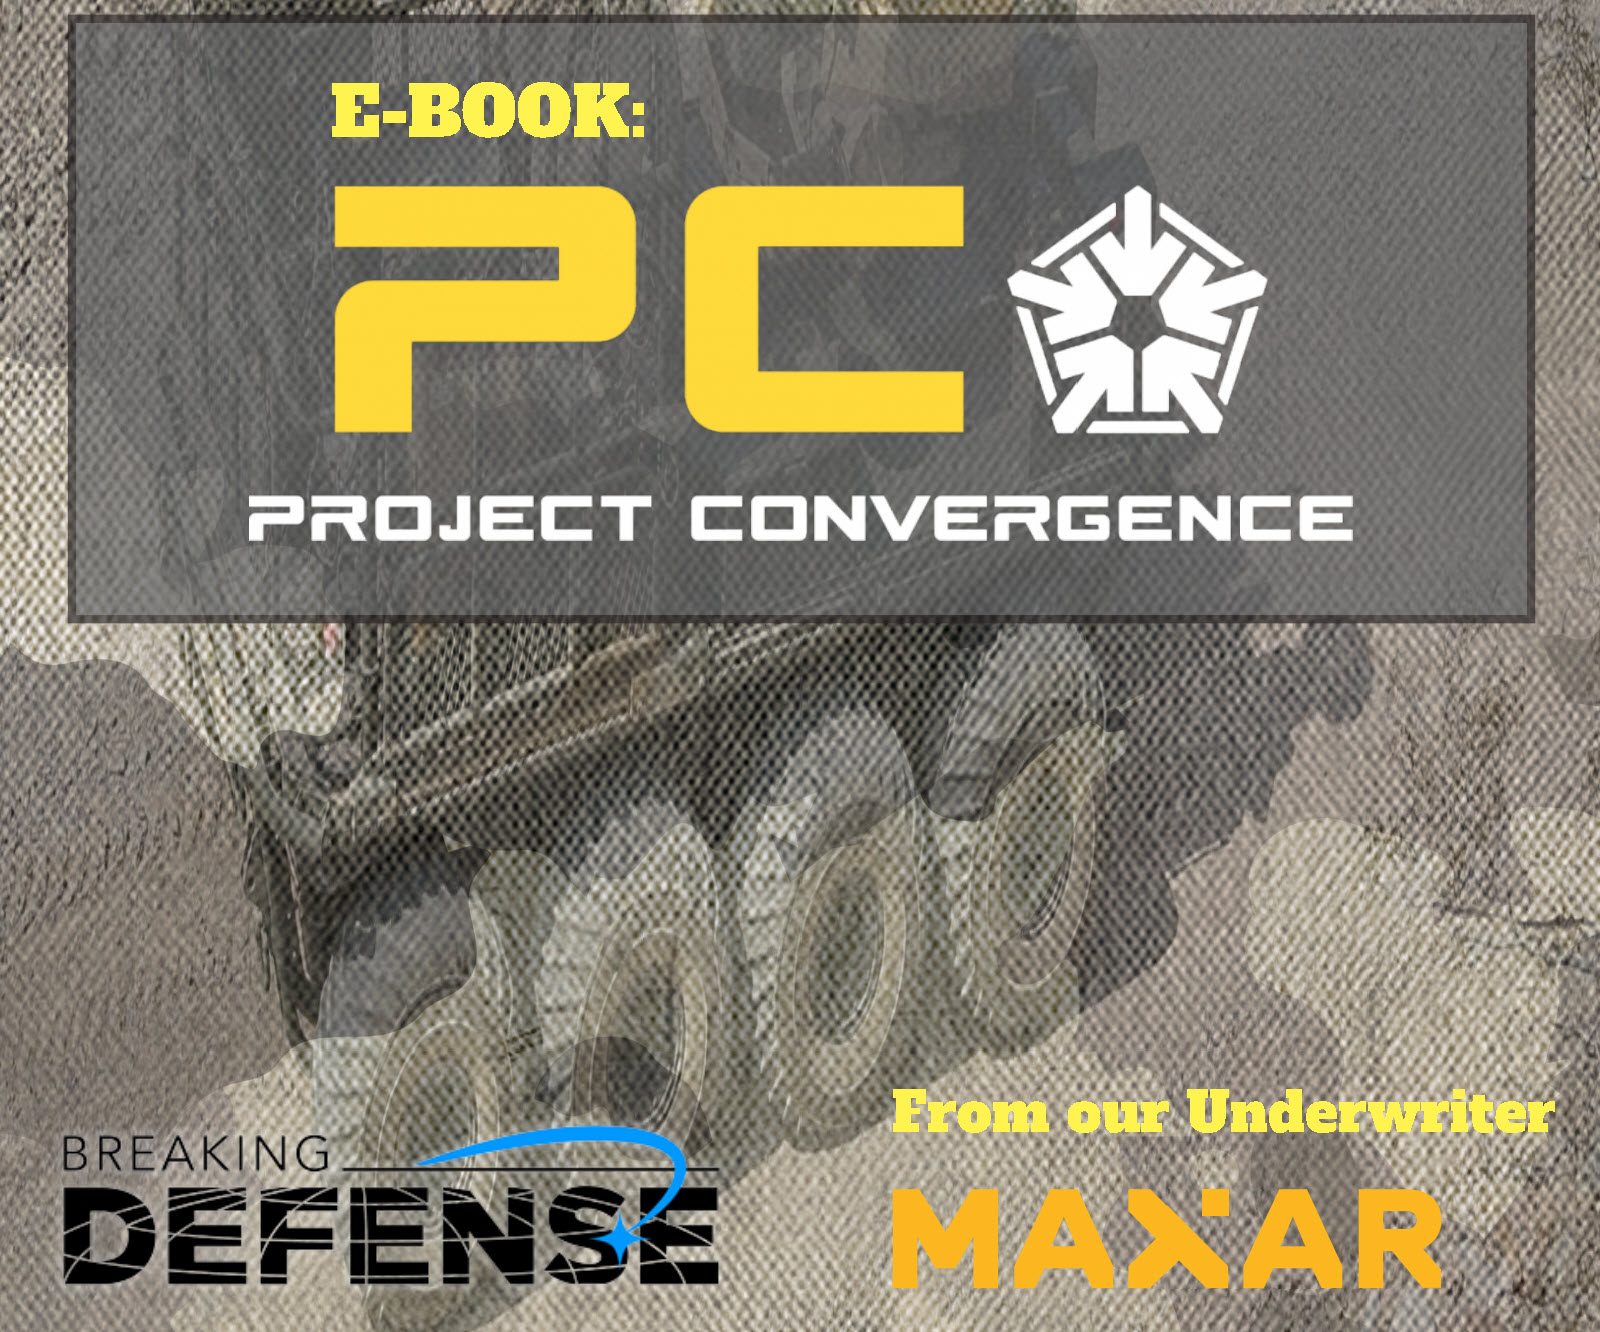 Download our Project Convergence eBook